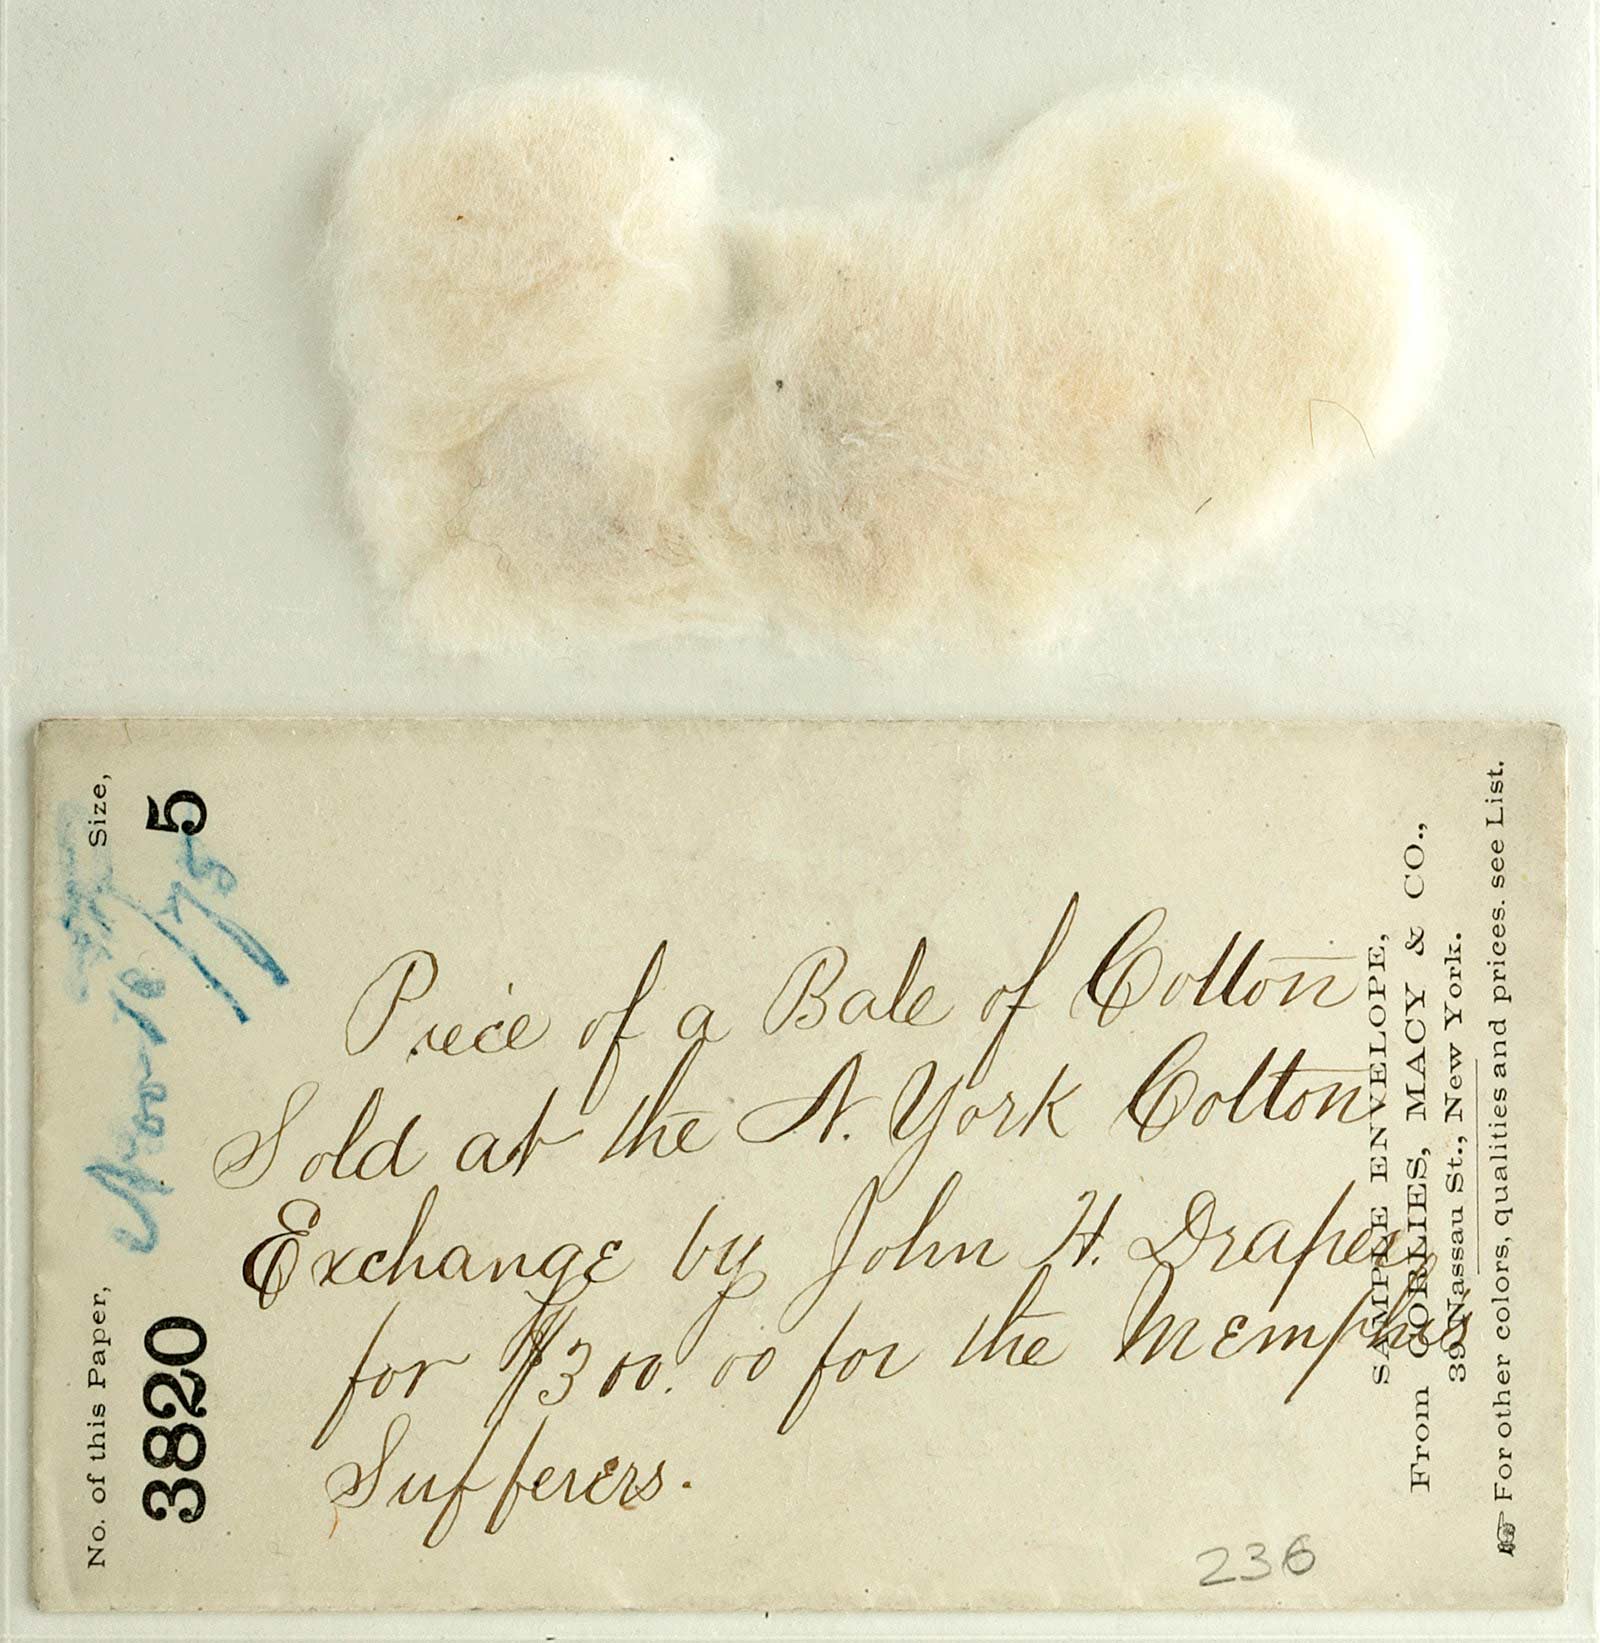 Cotton from a bale sold at the New York Cotton Exchange, which Southern merchants like the Lehman Brothers made into the leading cotton futures market, 1875